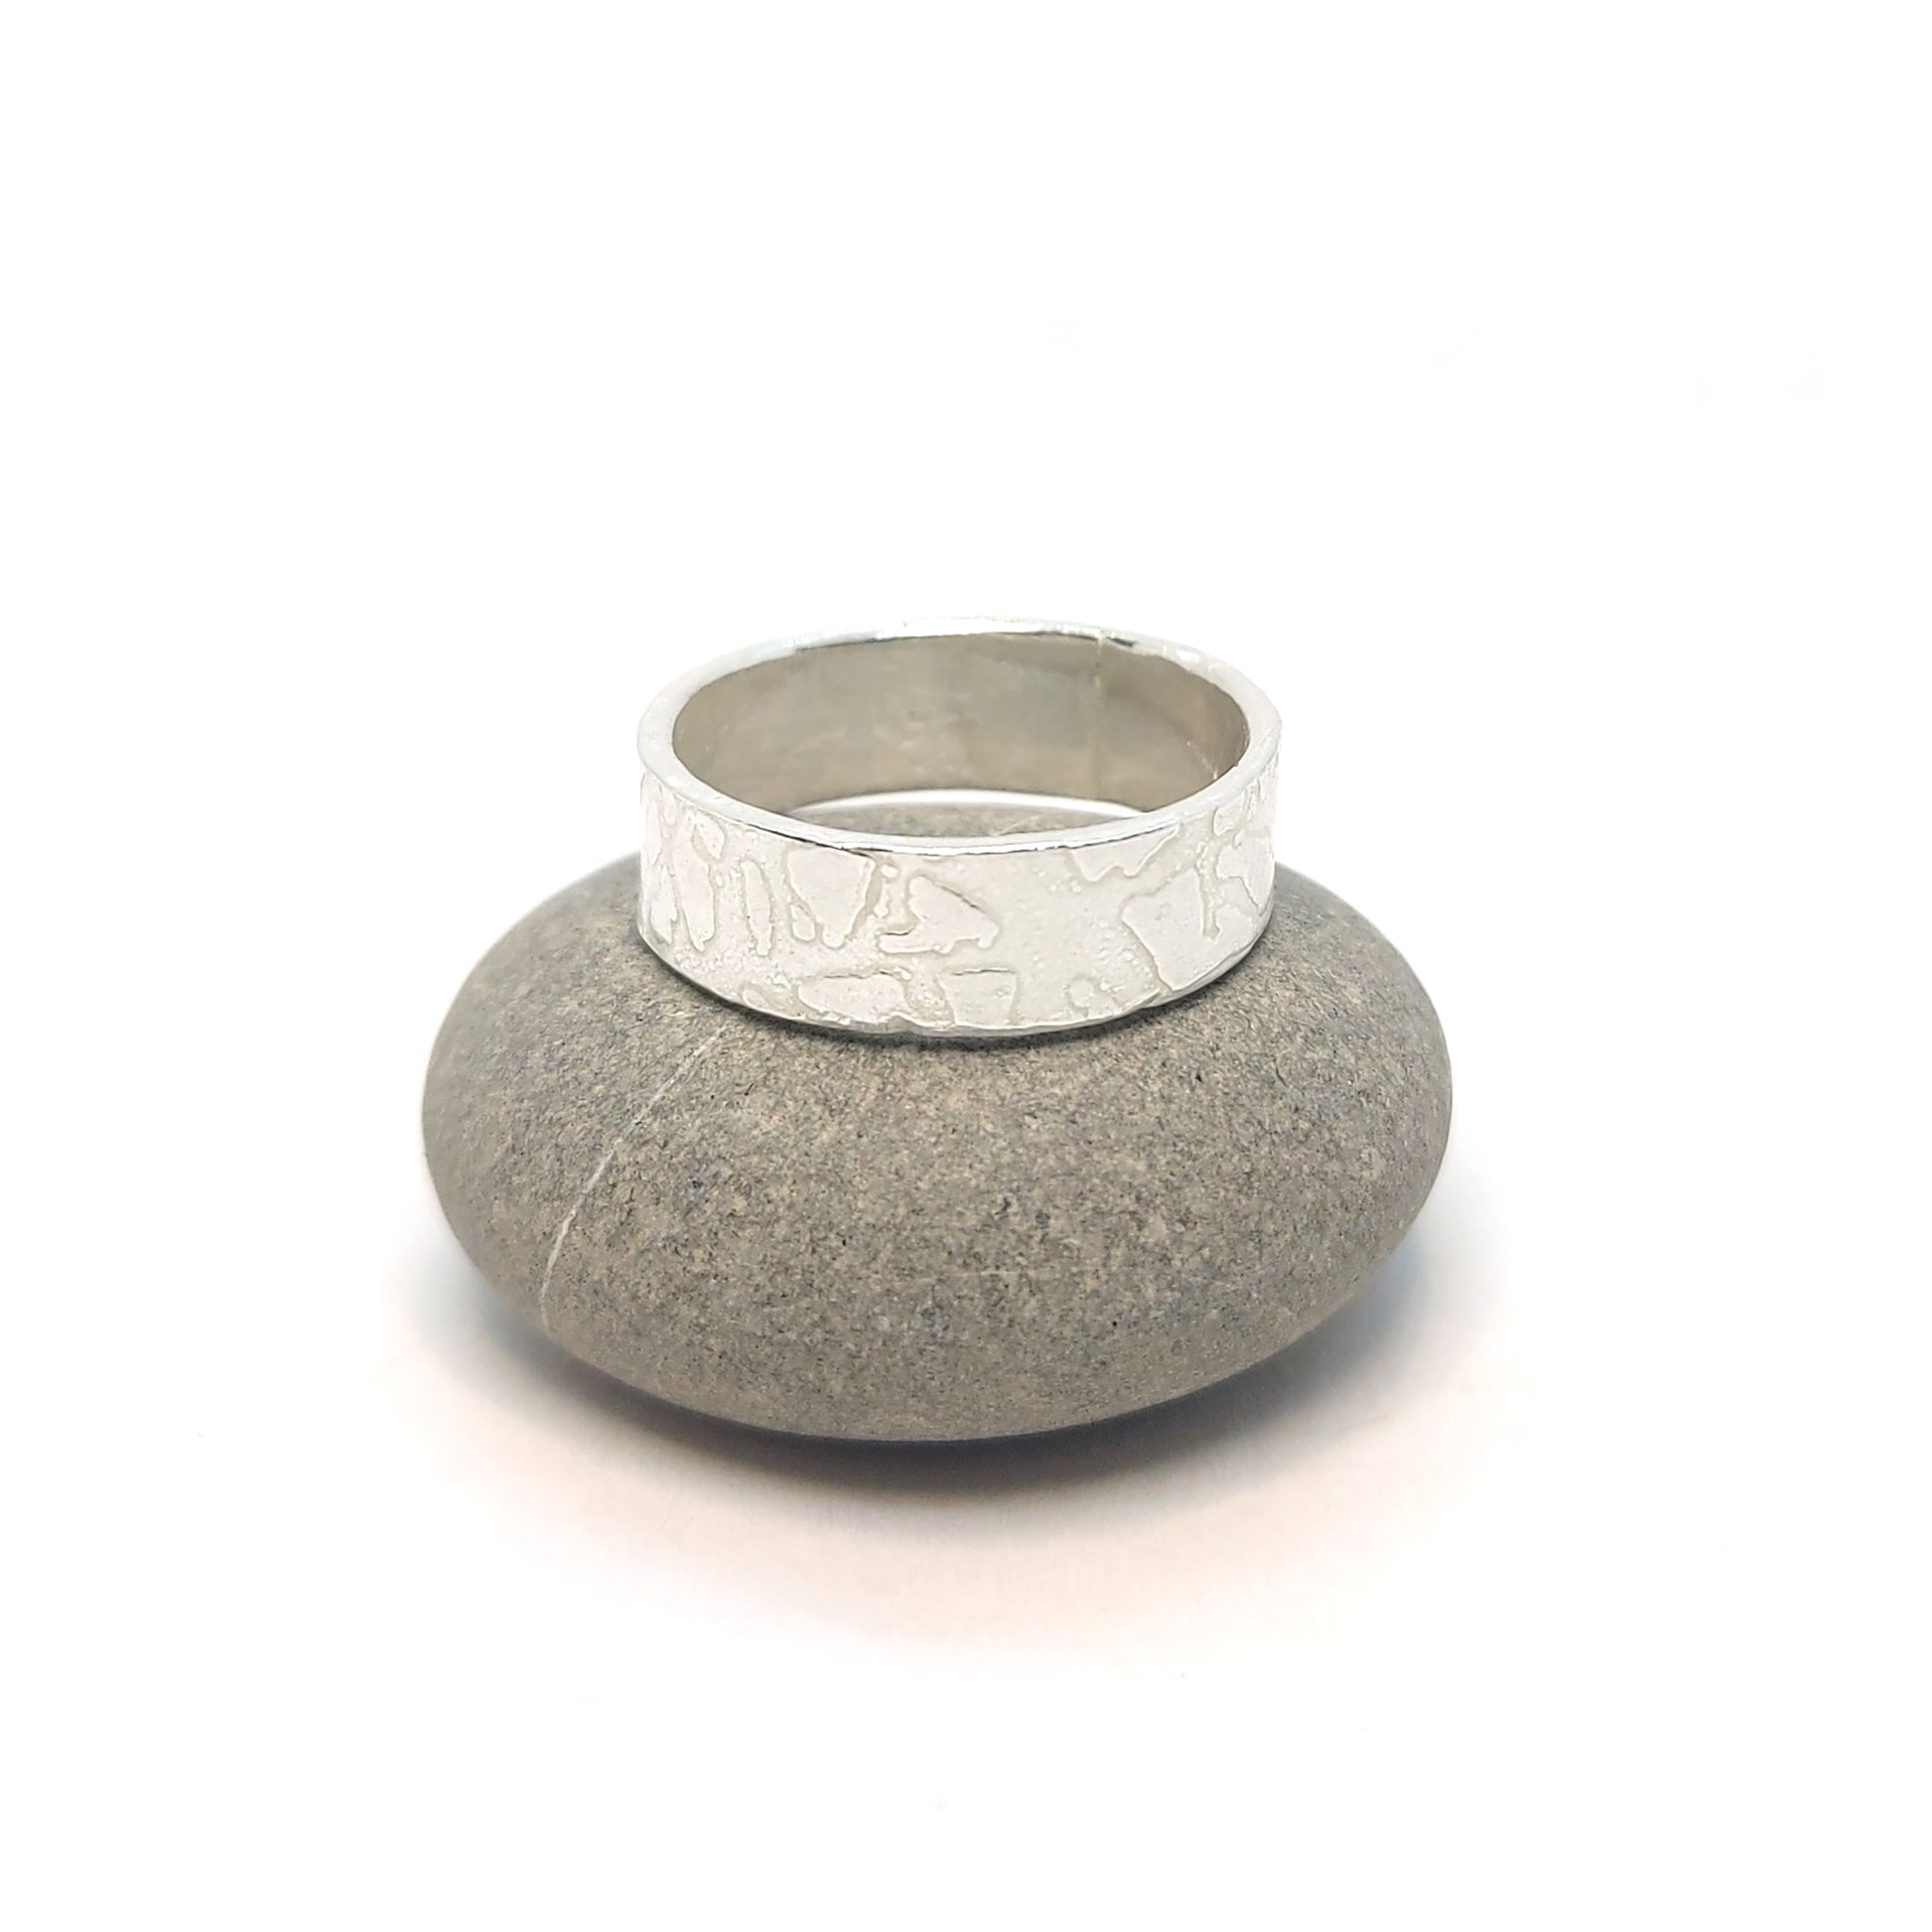 Silver band ring with islands in the sea style pattern. Pictured on a pebble.